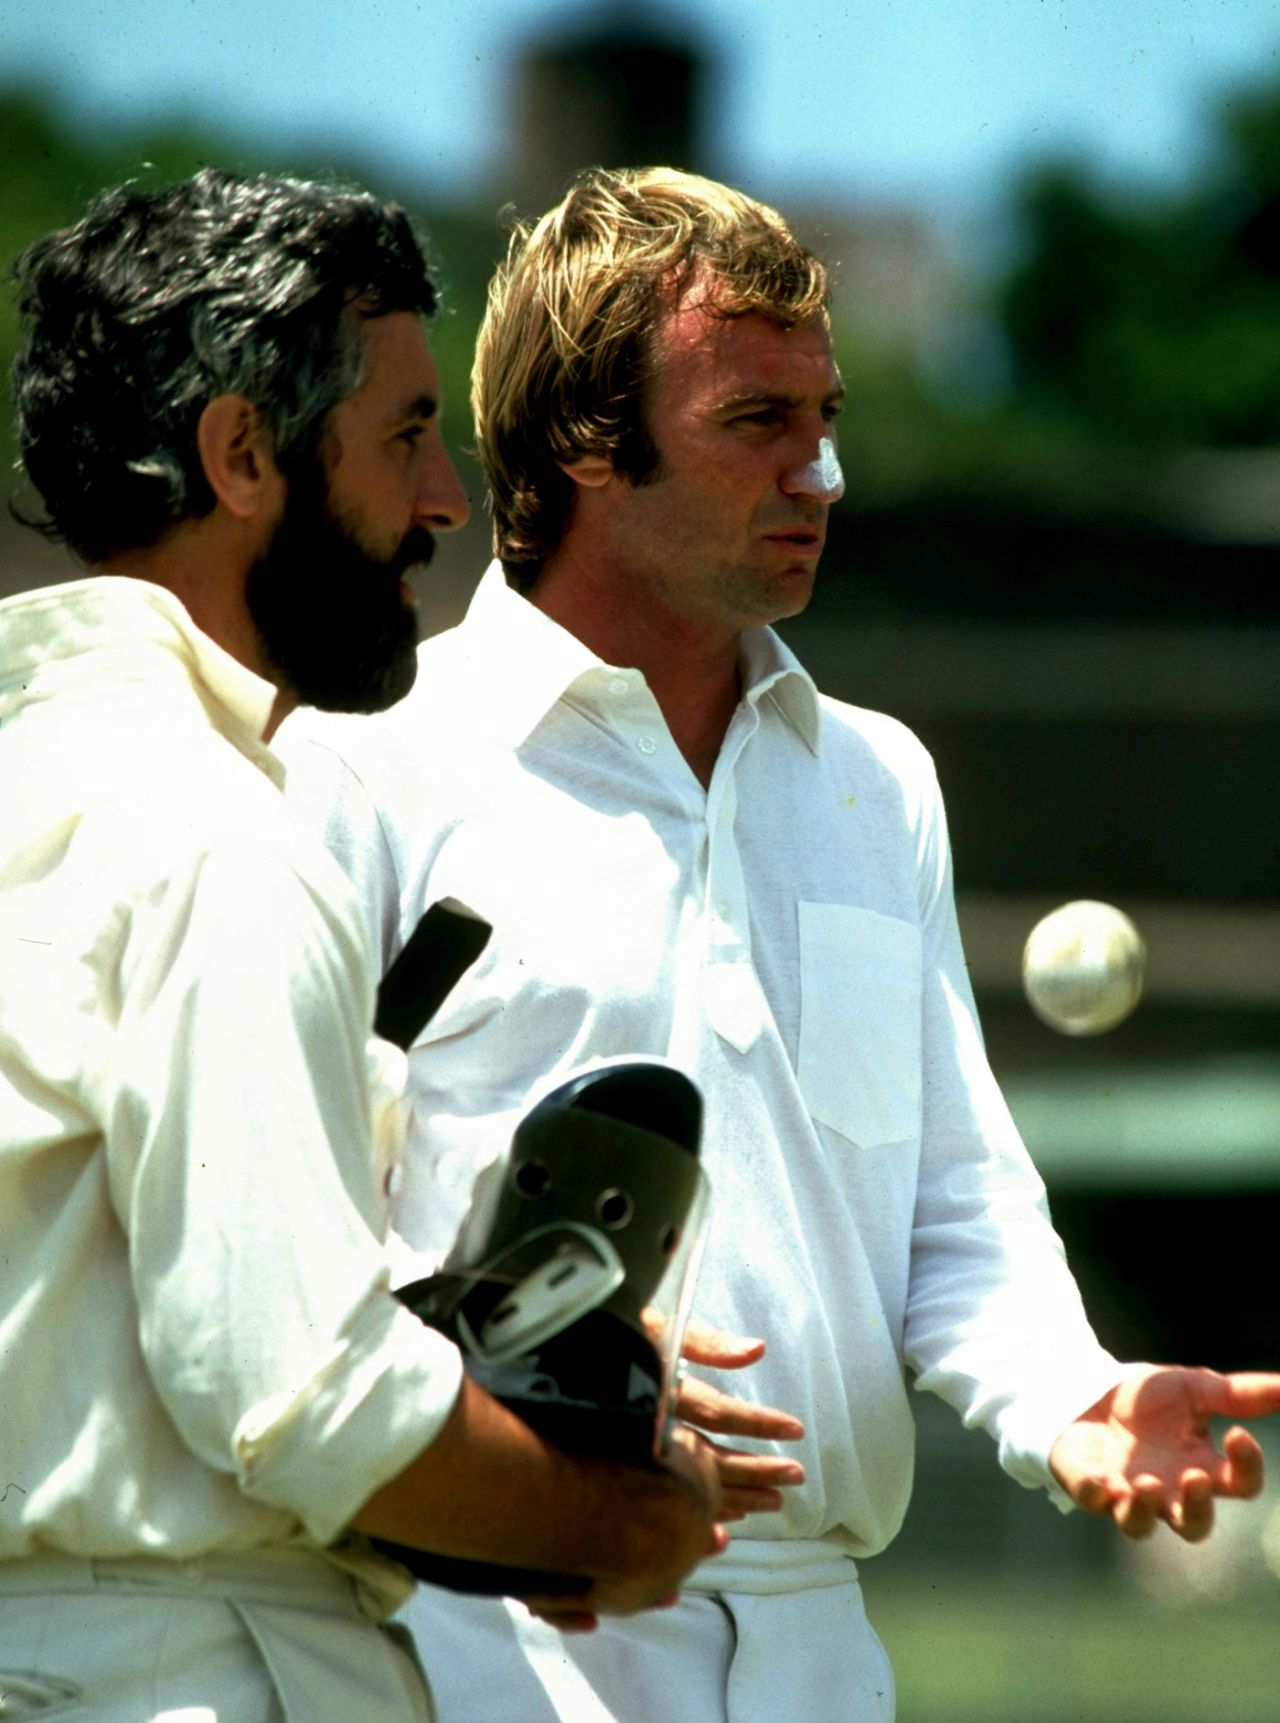 Mike Brearley and John Lever discuss their options before the start of play, England v West Indies, Benson & Hedges Cup, Sydney, November 28, 1979 